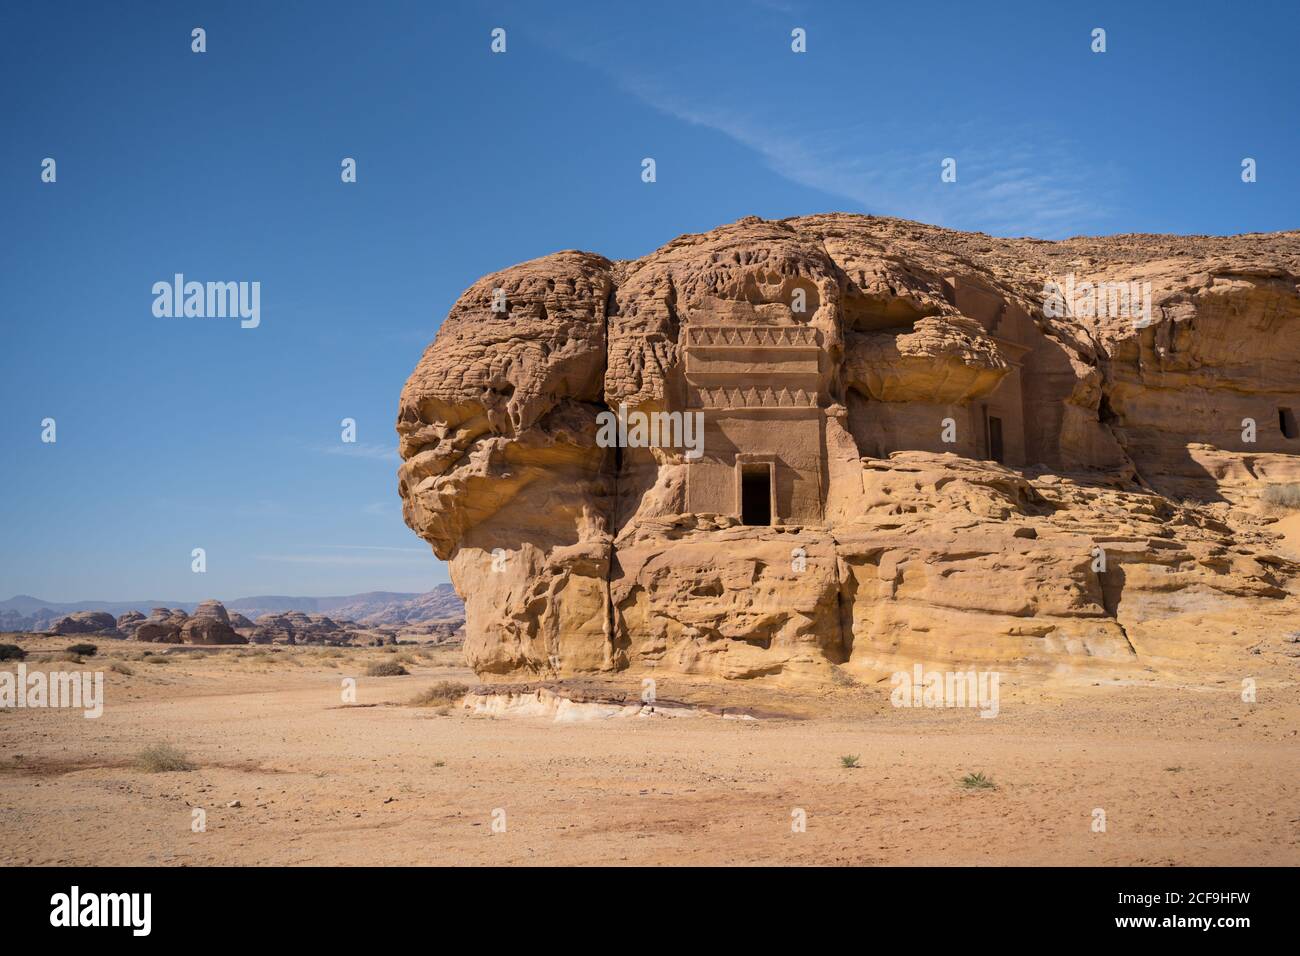 Picturesque scenery of tombs carved into sandstone cliffs as architecture and archeological site in Saudi Arabia Stock Photo